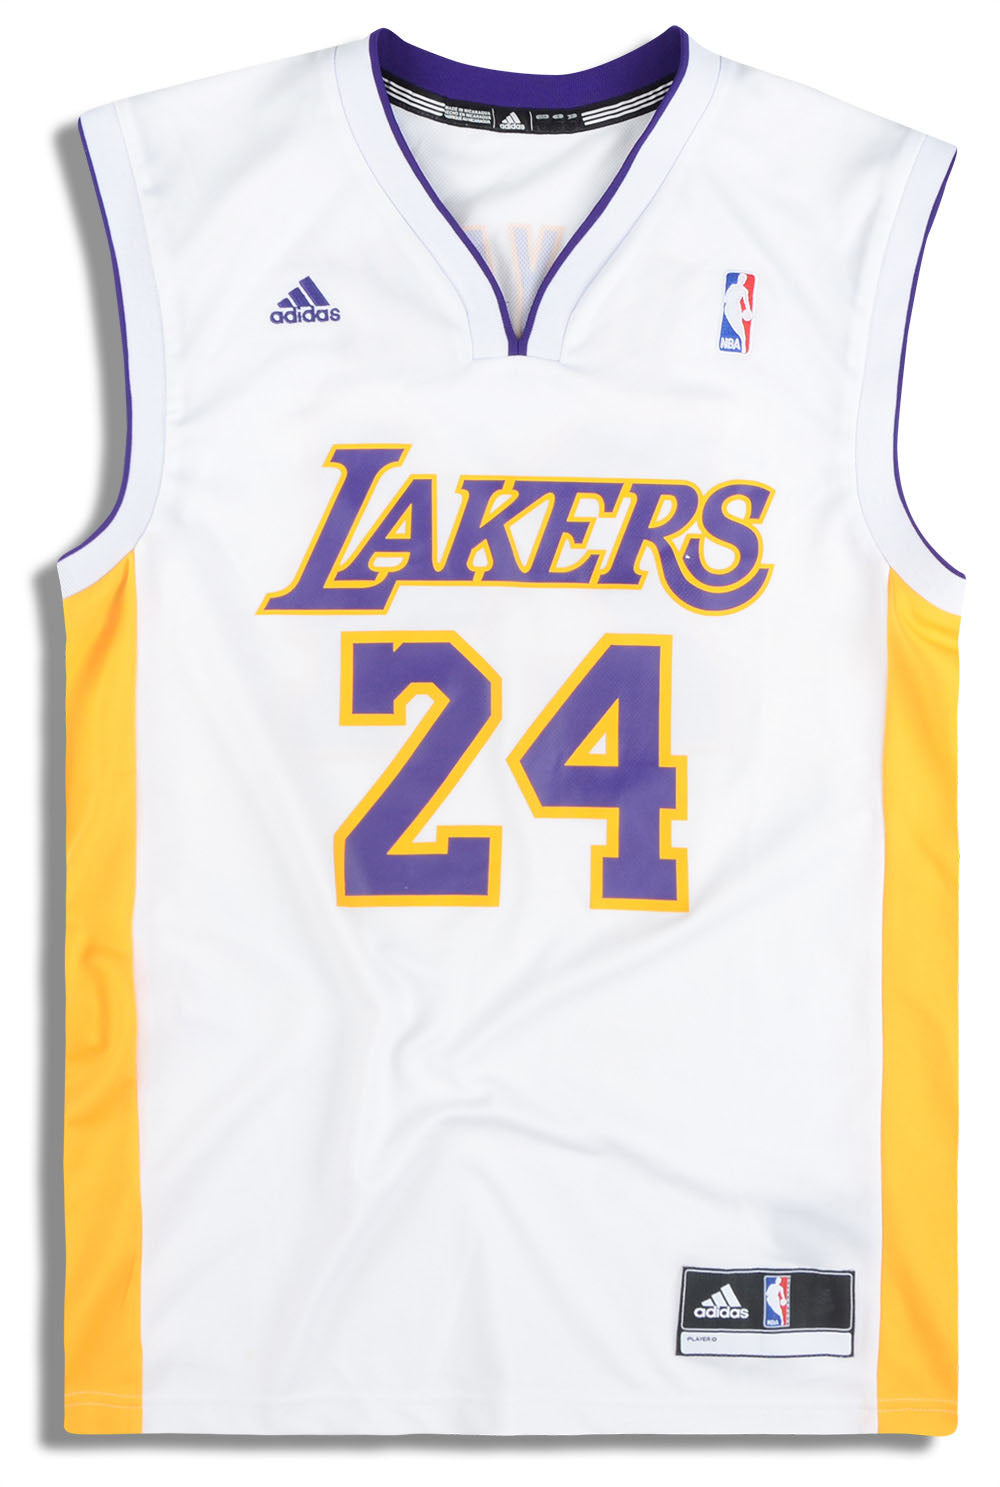 2010-14 LA LAKERS BRYANT #24 ADIDAS JERSEY (HOME) S